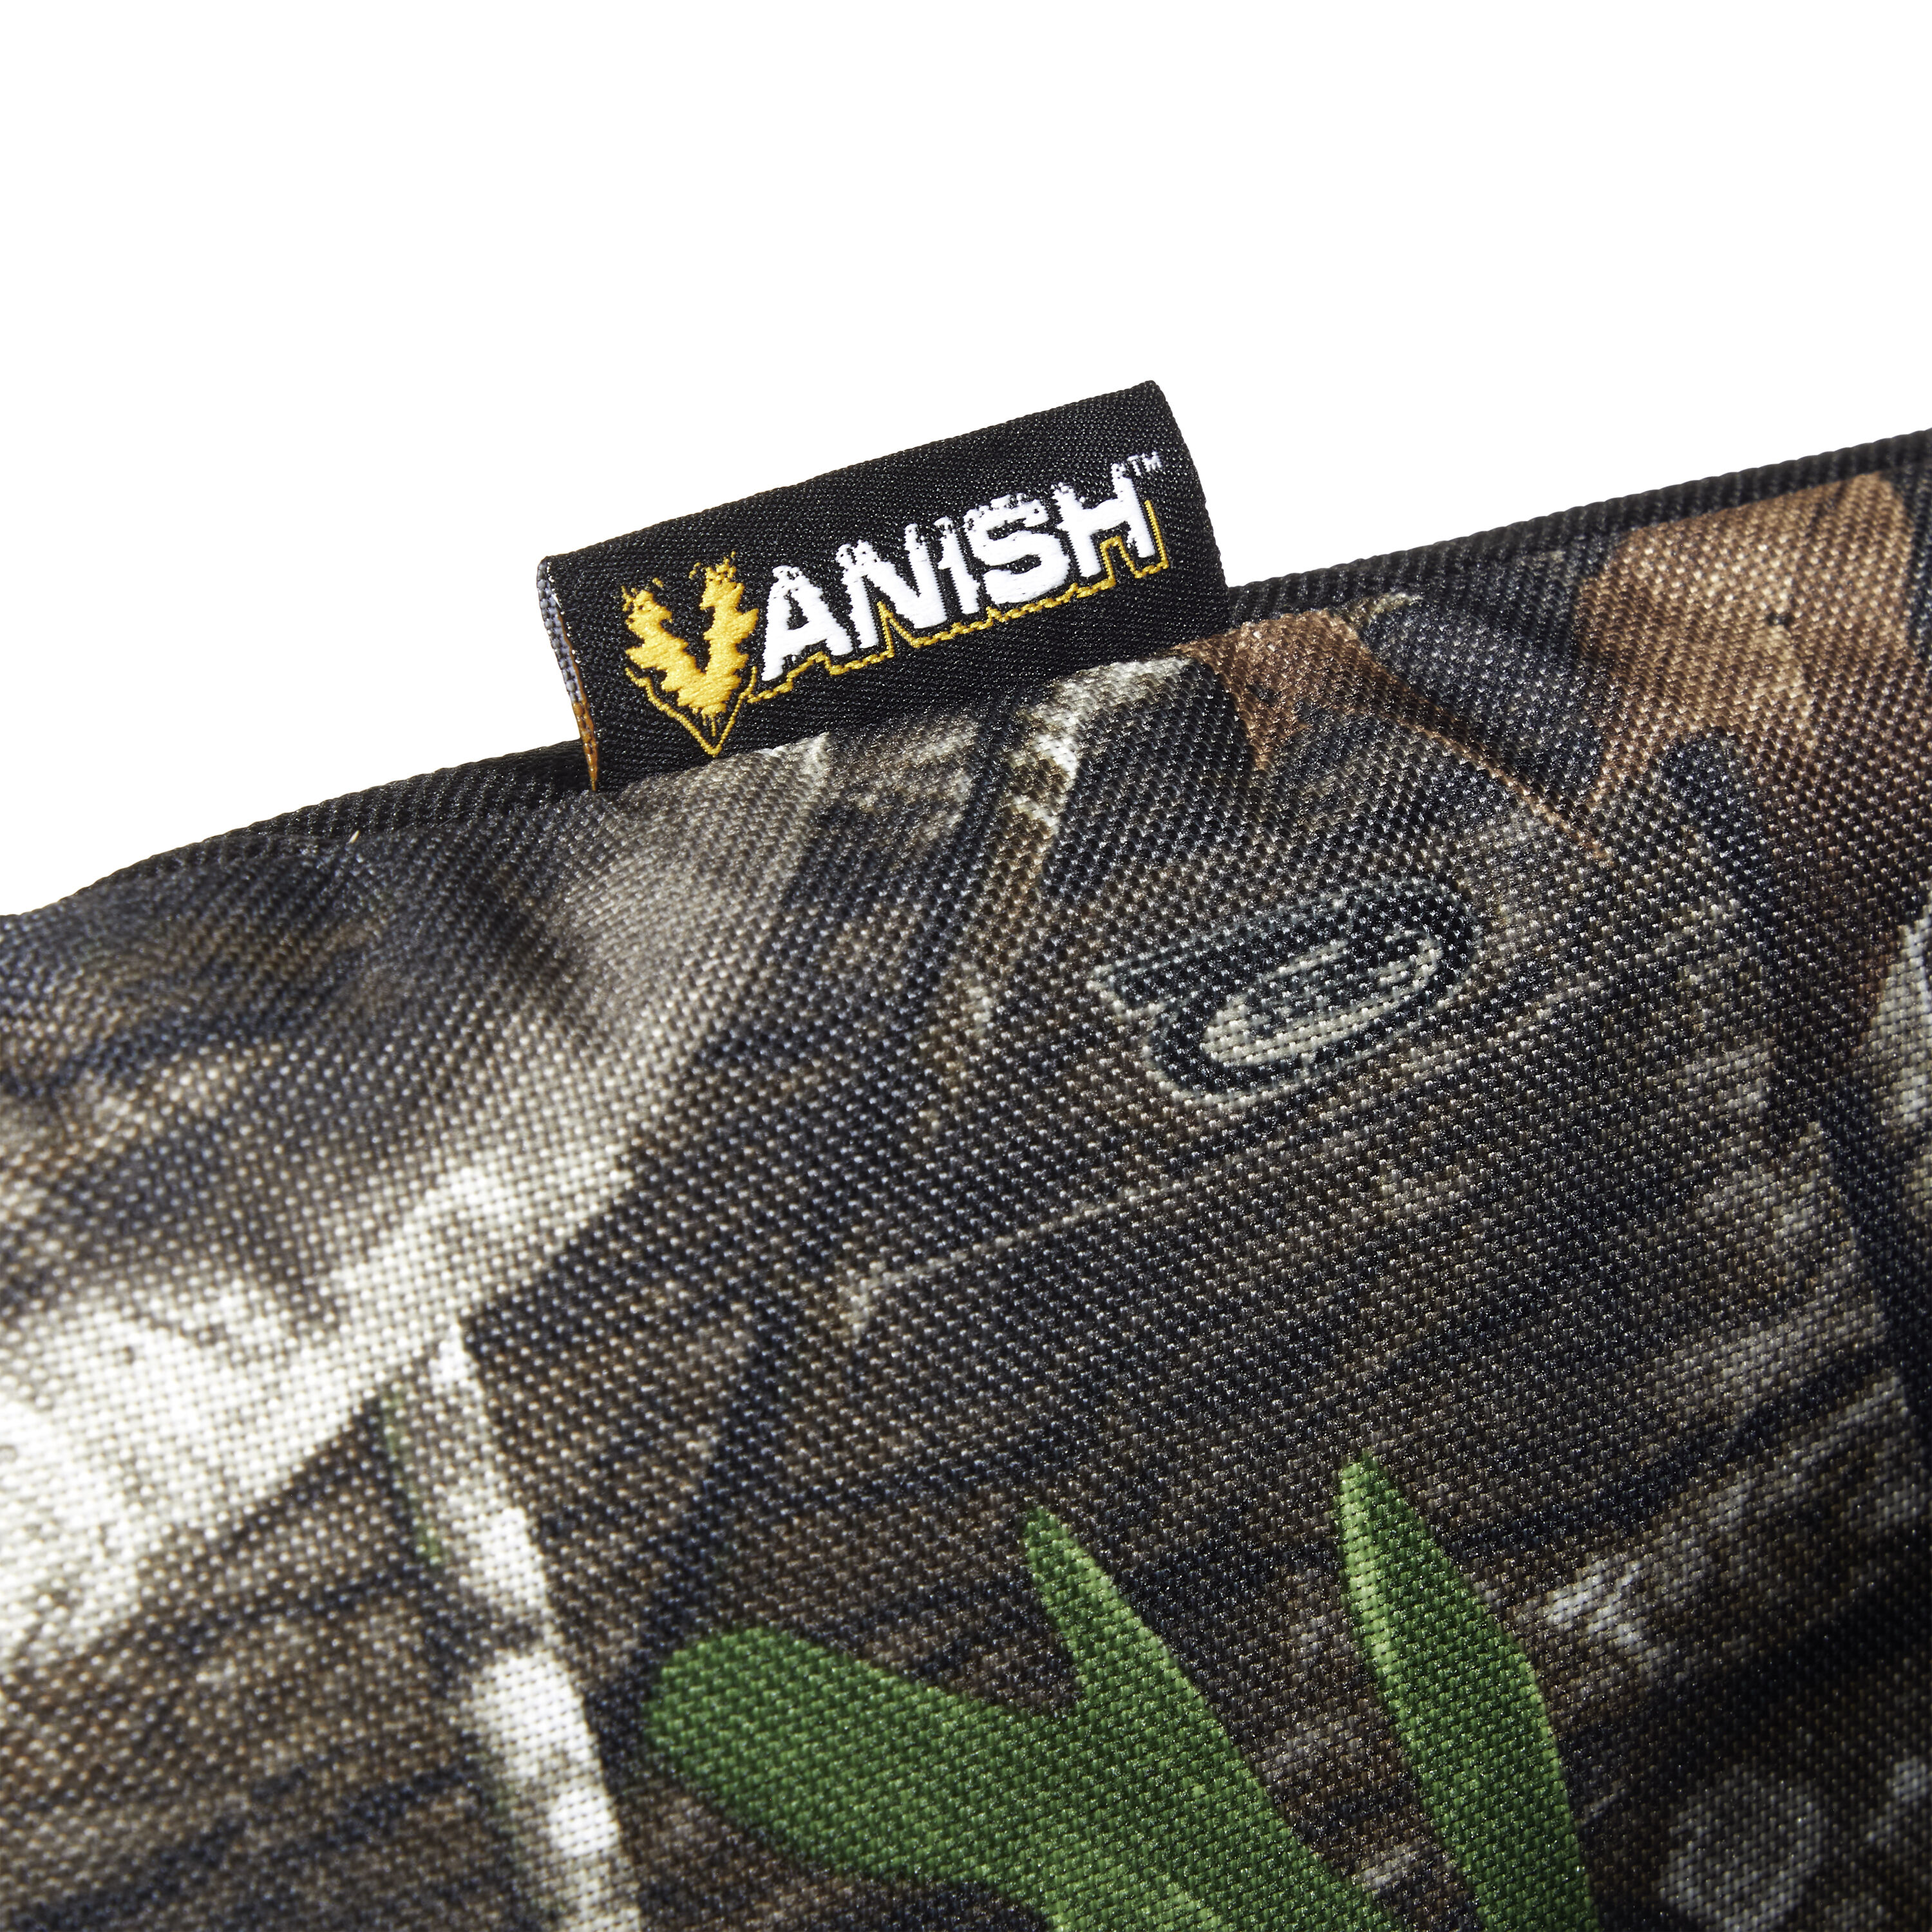 VANISH Allen Company Molded EVA Foam Hunting Stool with Adjustable Strap  and Waterproof Bottom - Lightweight and Portable in the Hunting Equipment &  Apparel department at